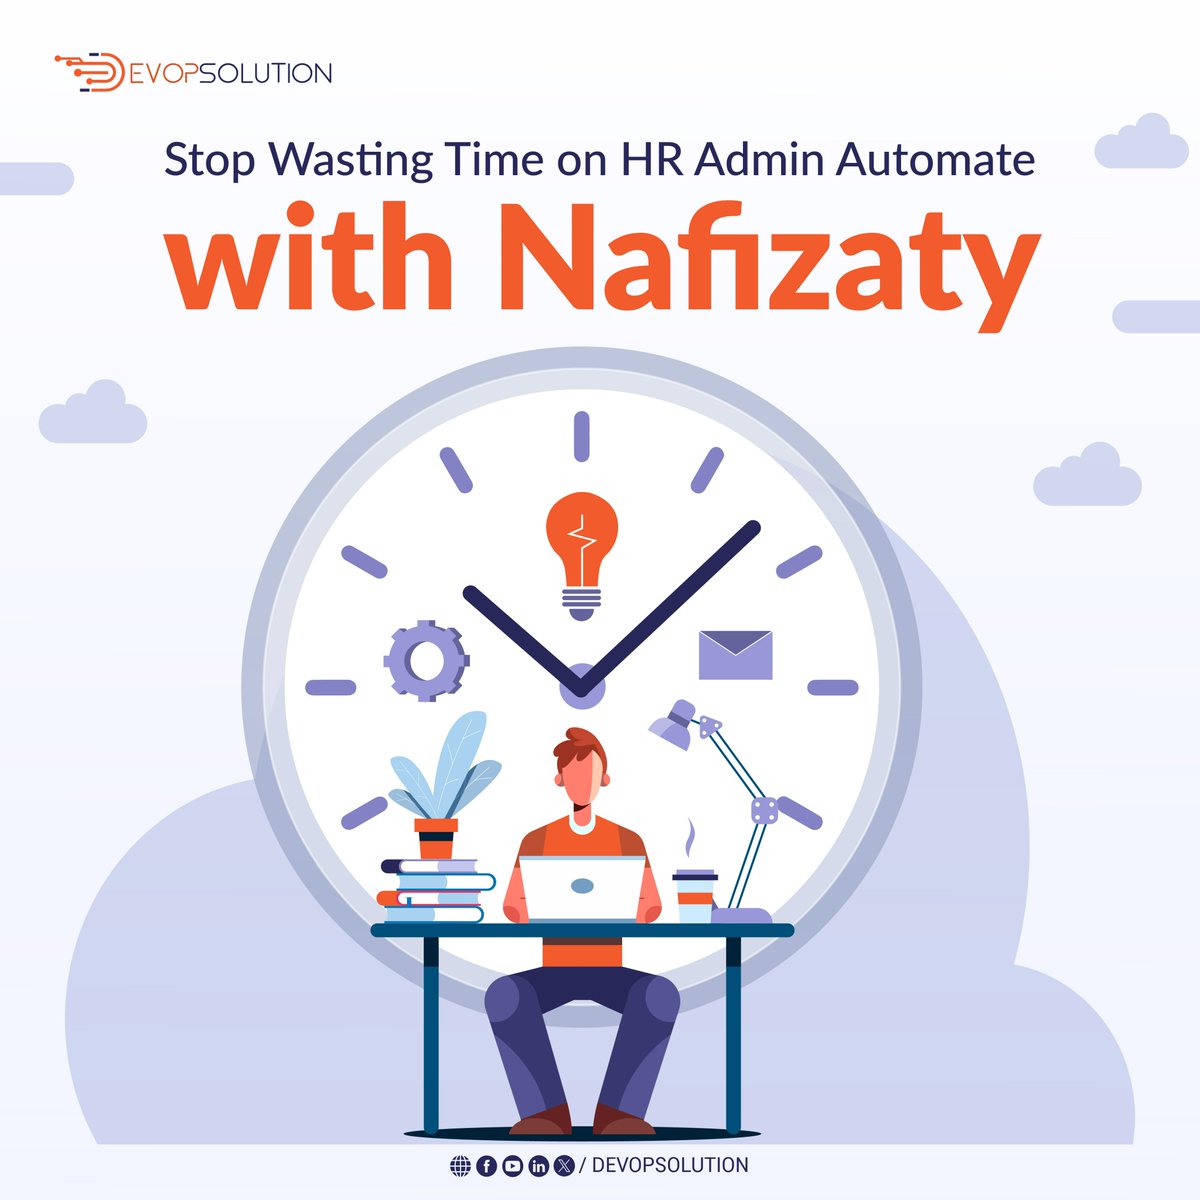 Did you know HR teams waste 14 hrs/week on manual tasks? Nafizaty automates leave requests, workflows & more. Reclaim your time for strategic HR. bit.ly/Nafizaty
#Hrtech #Hrsoftware #DigitalTransformation